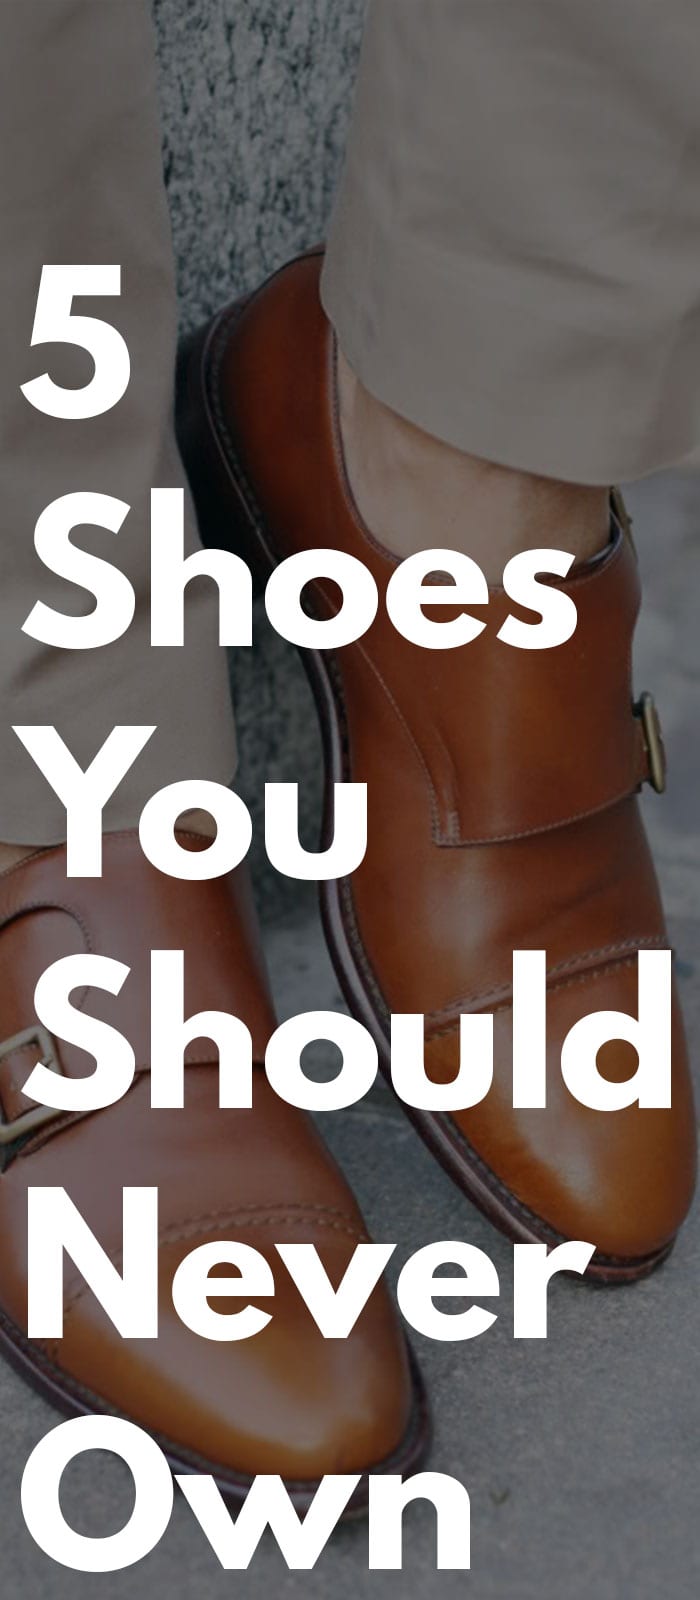 5 Shoes You Should Never Own